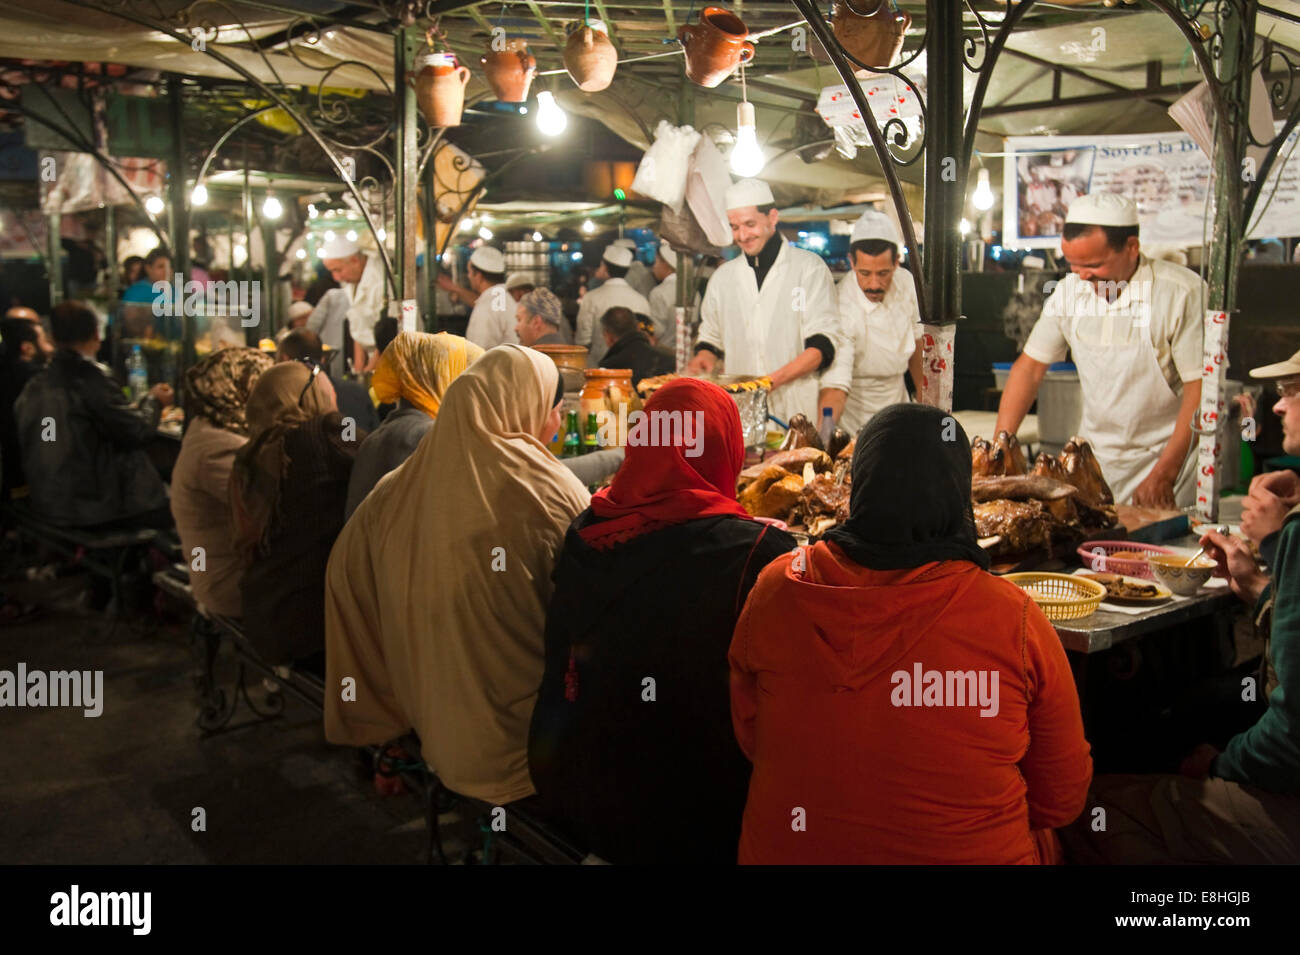 Horizontal view of a group of Muslim women eating in Place Jemaa el Fna (Djemaa el Fnaa) in Marrakech at night. Stock Photo